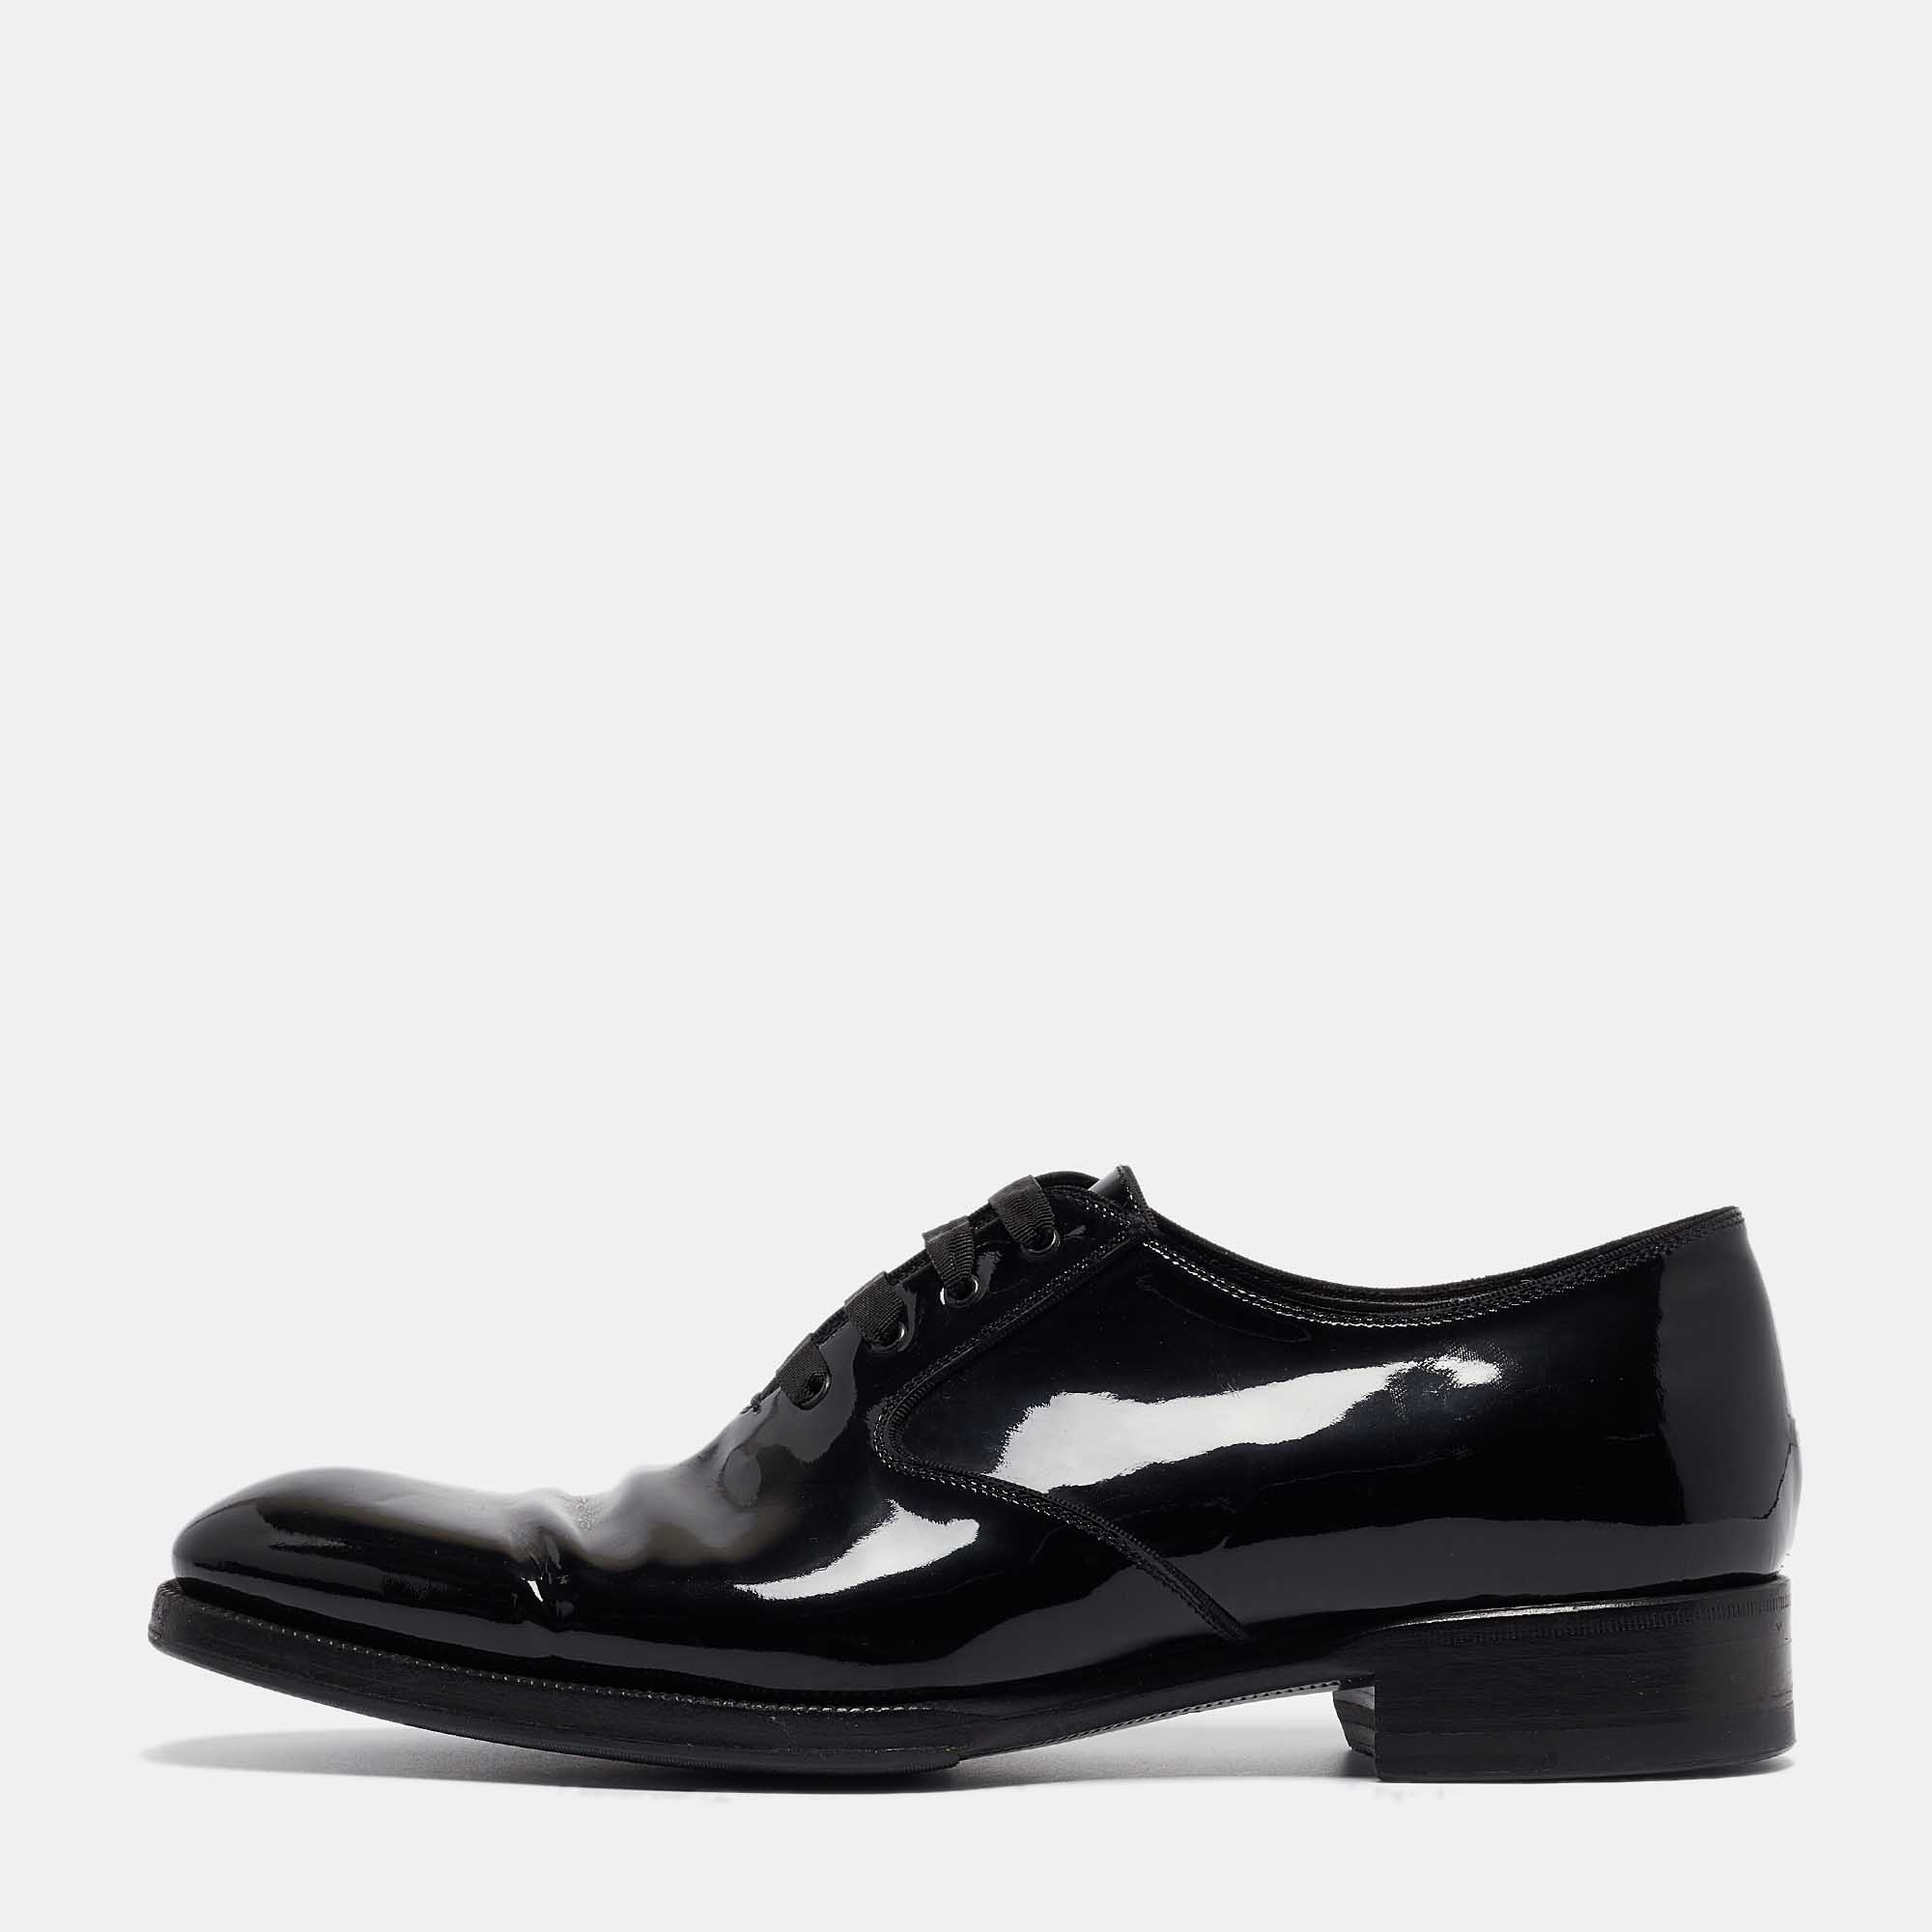 Pre-owned Tom Ford Black Patent Leather Lace Up Oxfords Size 43.5